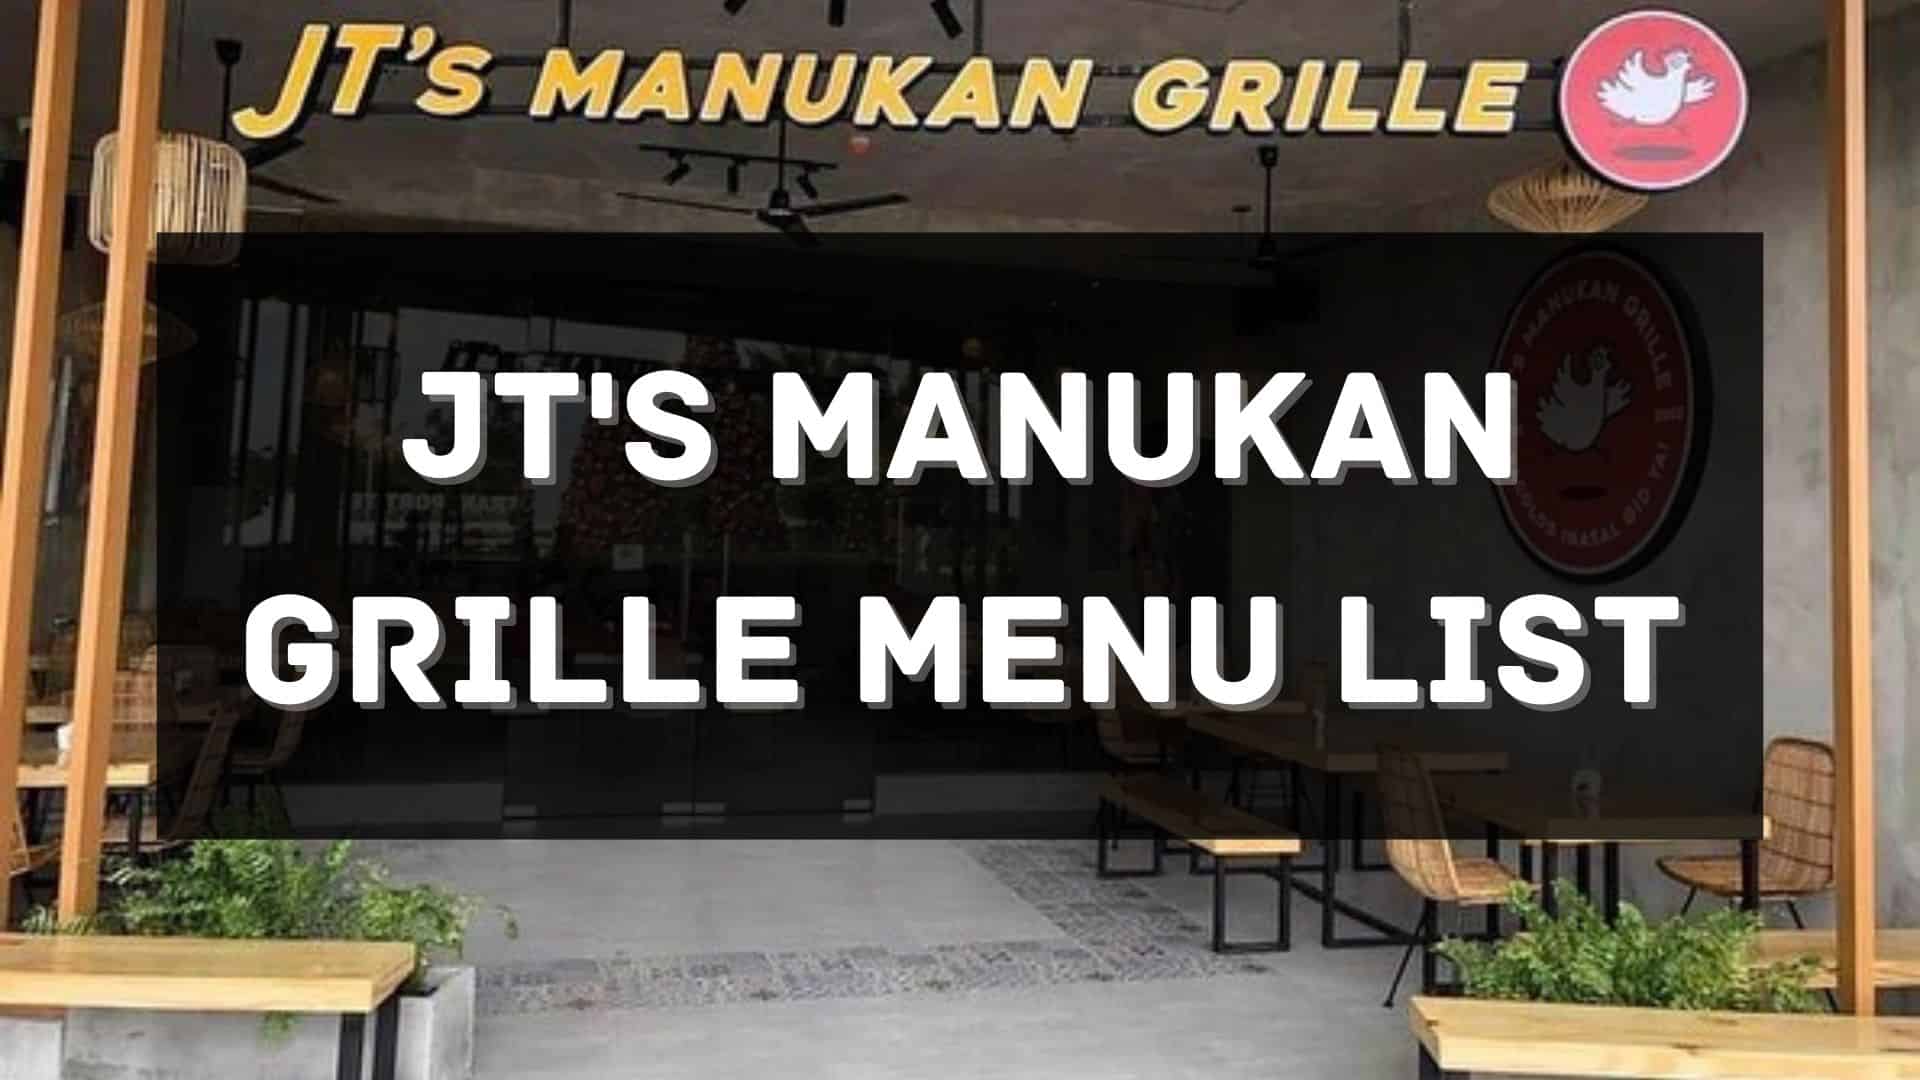 jt's manukan grille menu prices philippines